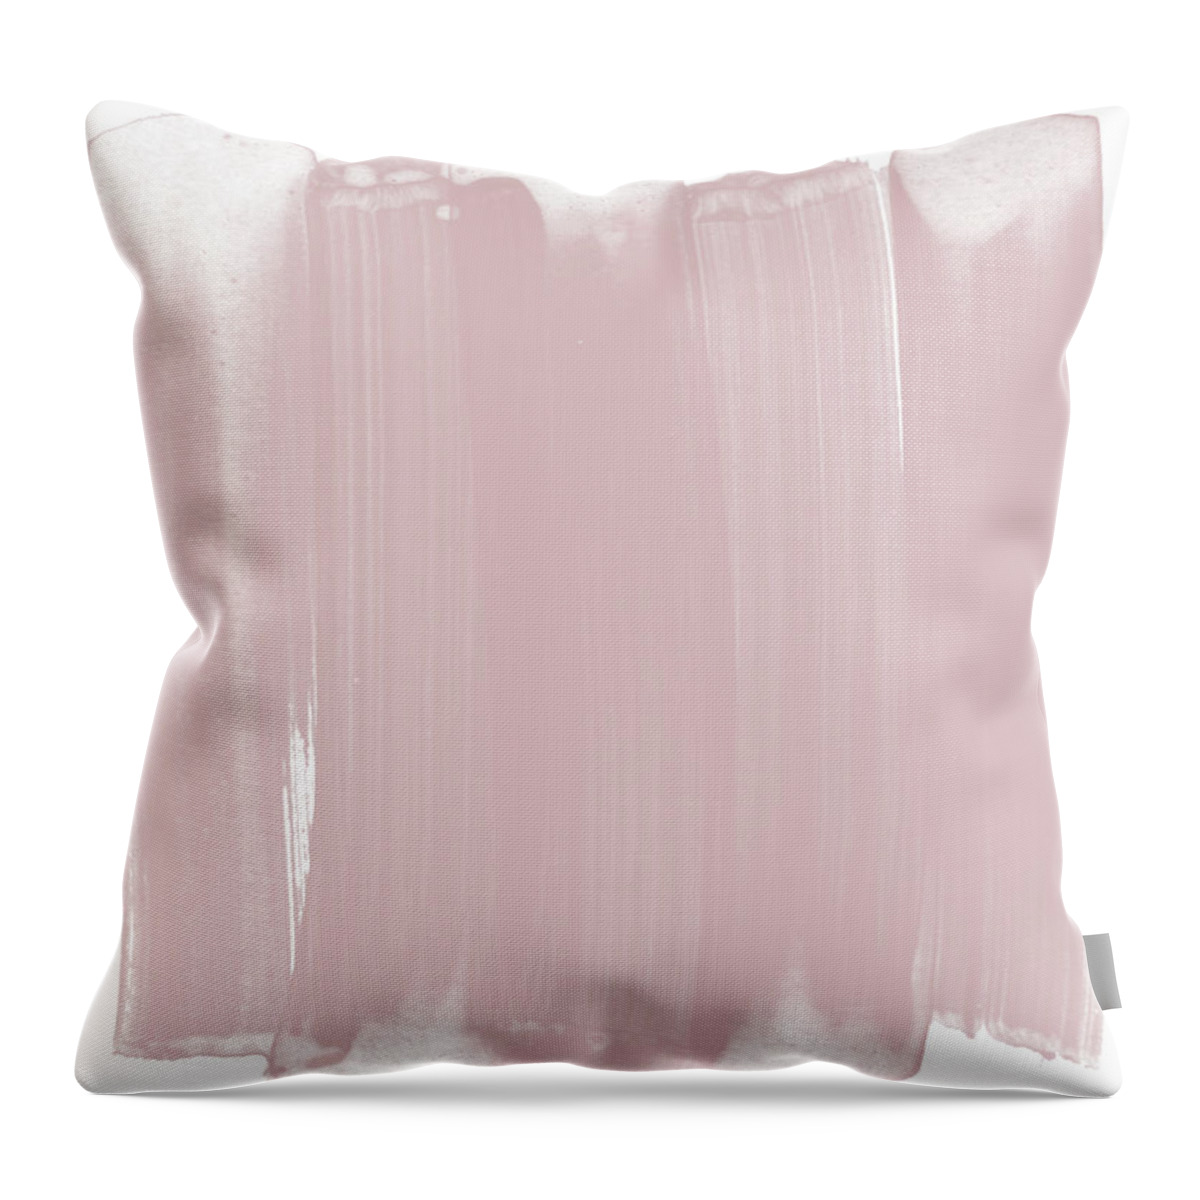 Pink Throw Pillow featuring the painting Pink Brushstrokes Minimalist Abstract Painting by Janine Aykens